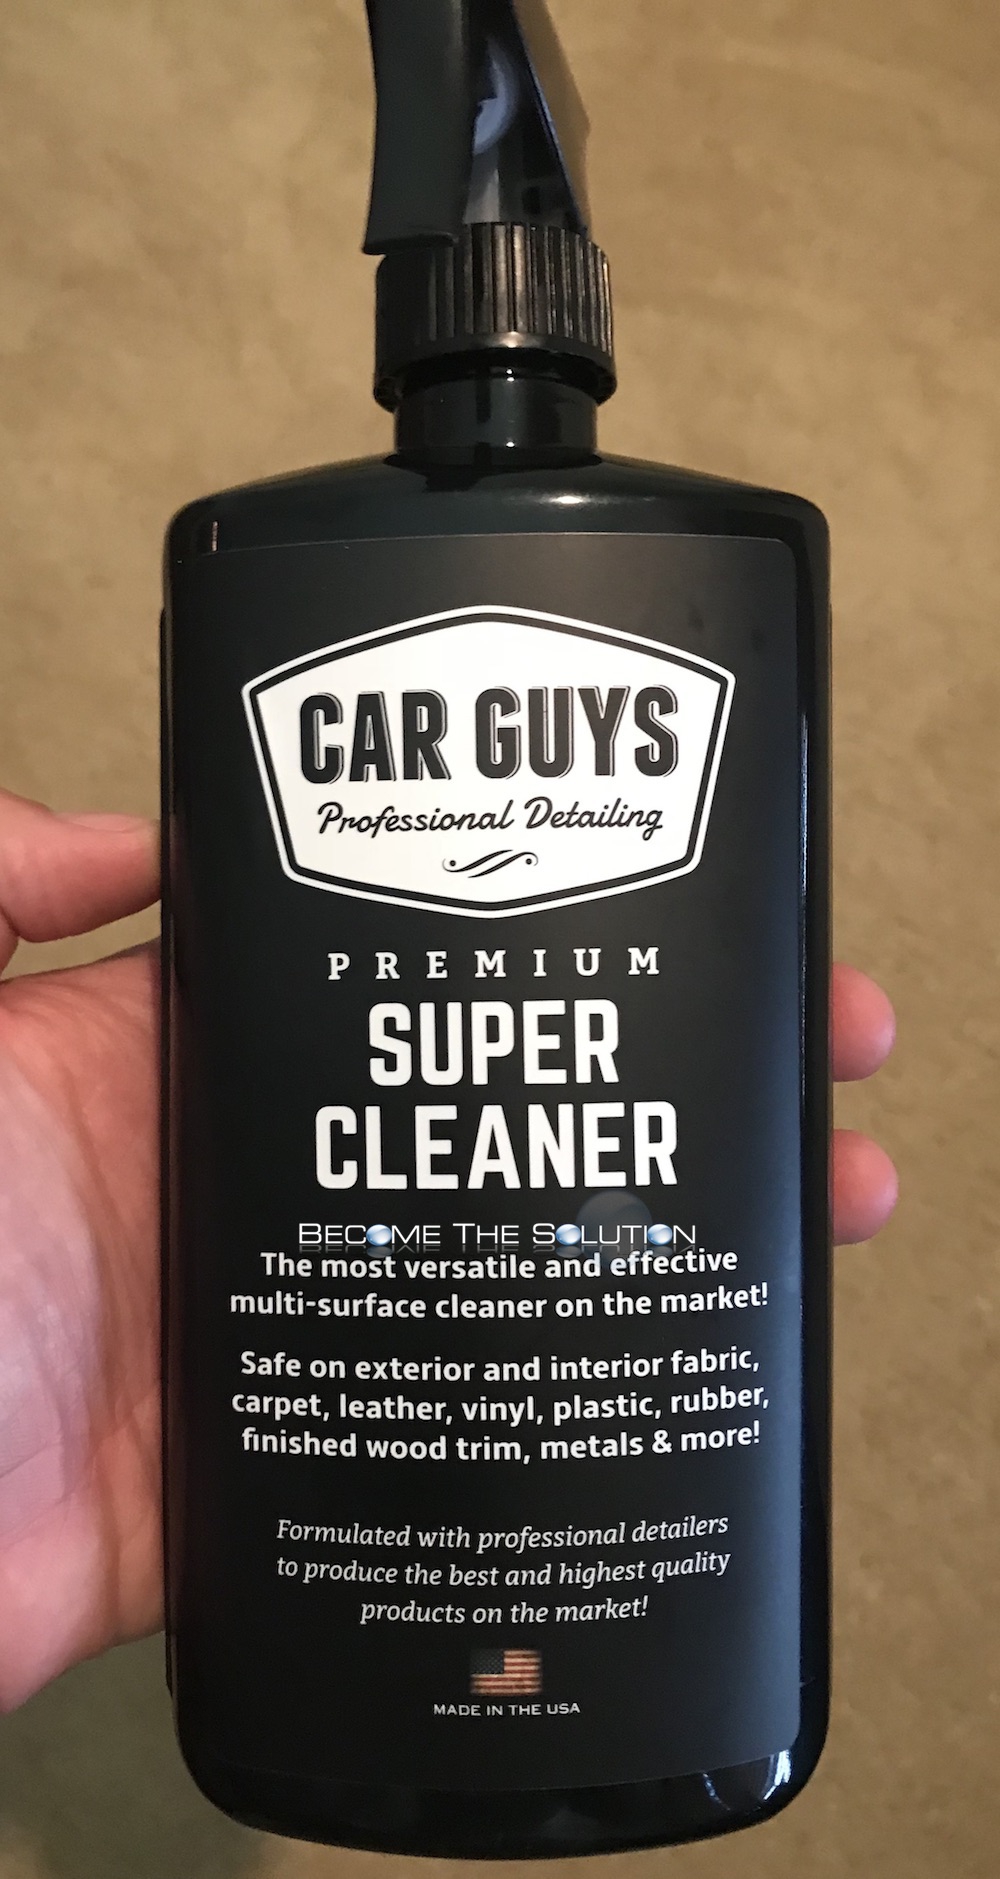 car guys super cleaner in stores